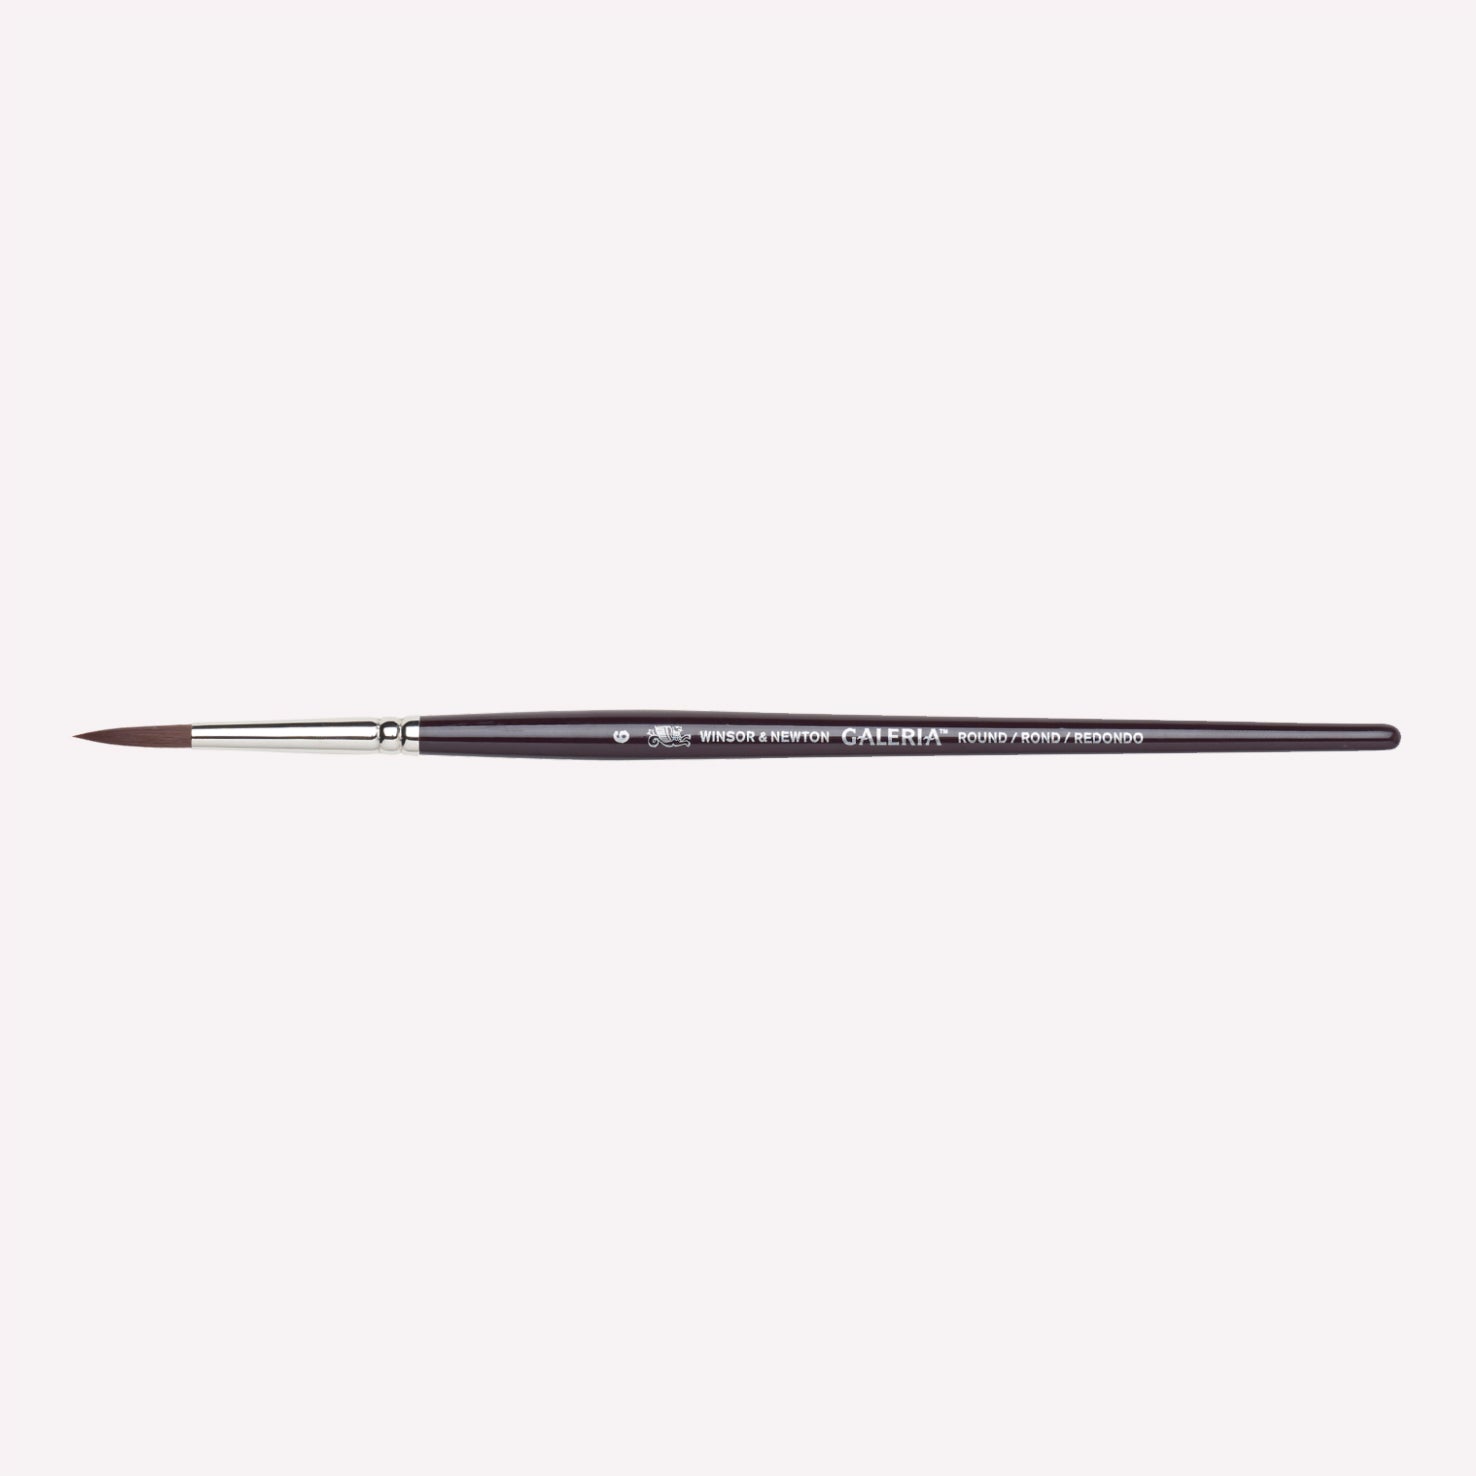 Winsor & Newton Galeria Round paintbrush in size 6. Brushes have synthetic filaments, and short wooden handles. 